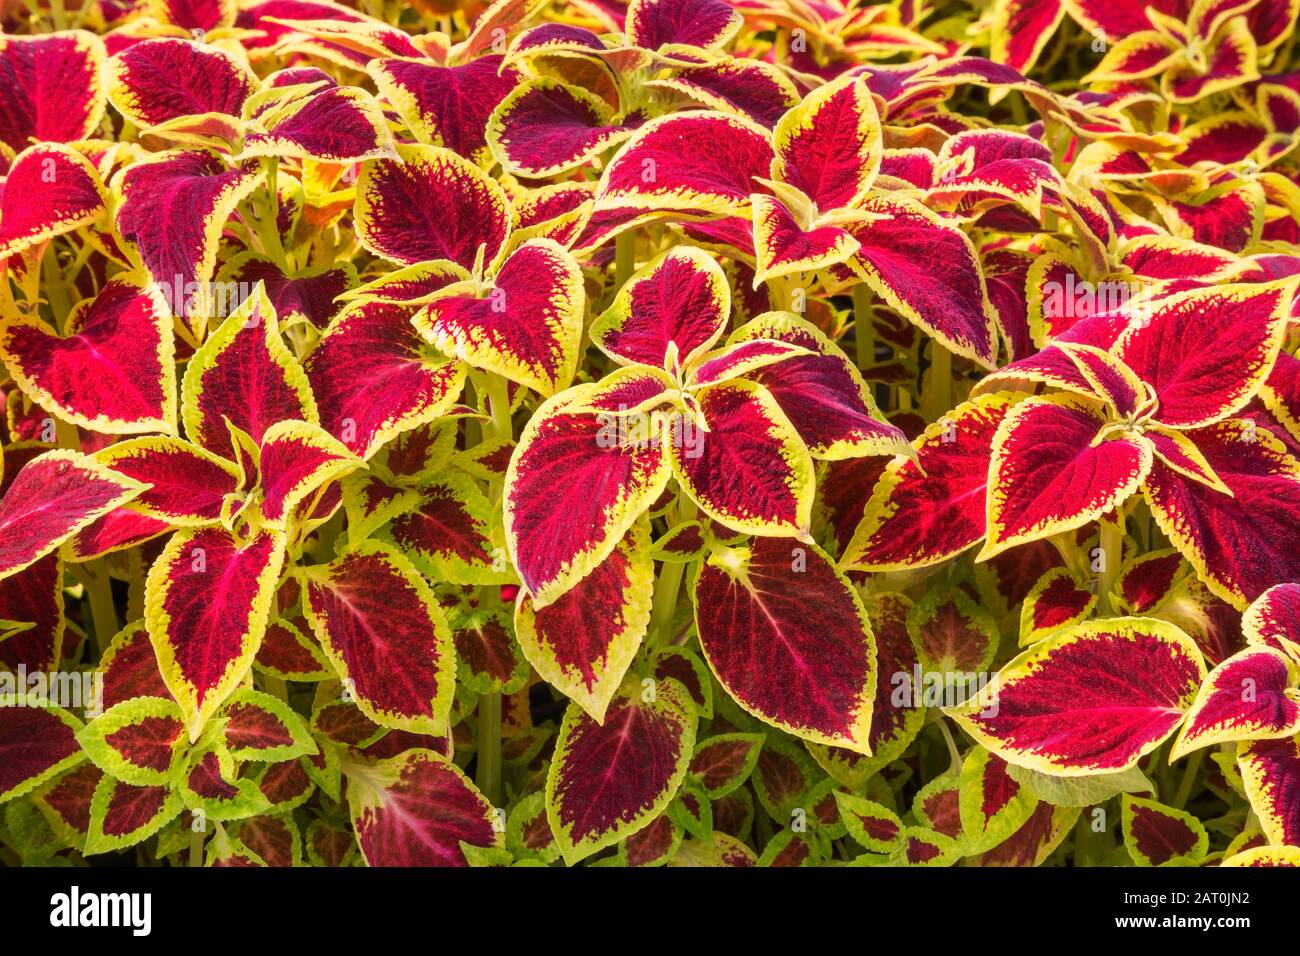 Burgundy and yellowish Solenostemon - Coleus plants being grown organically in containers inside a greenhouse Stock Photo